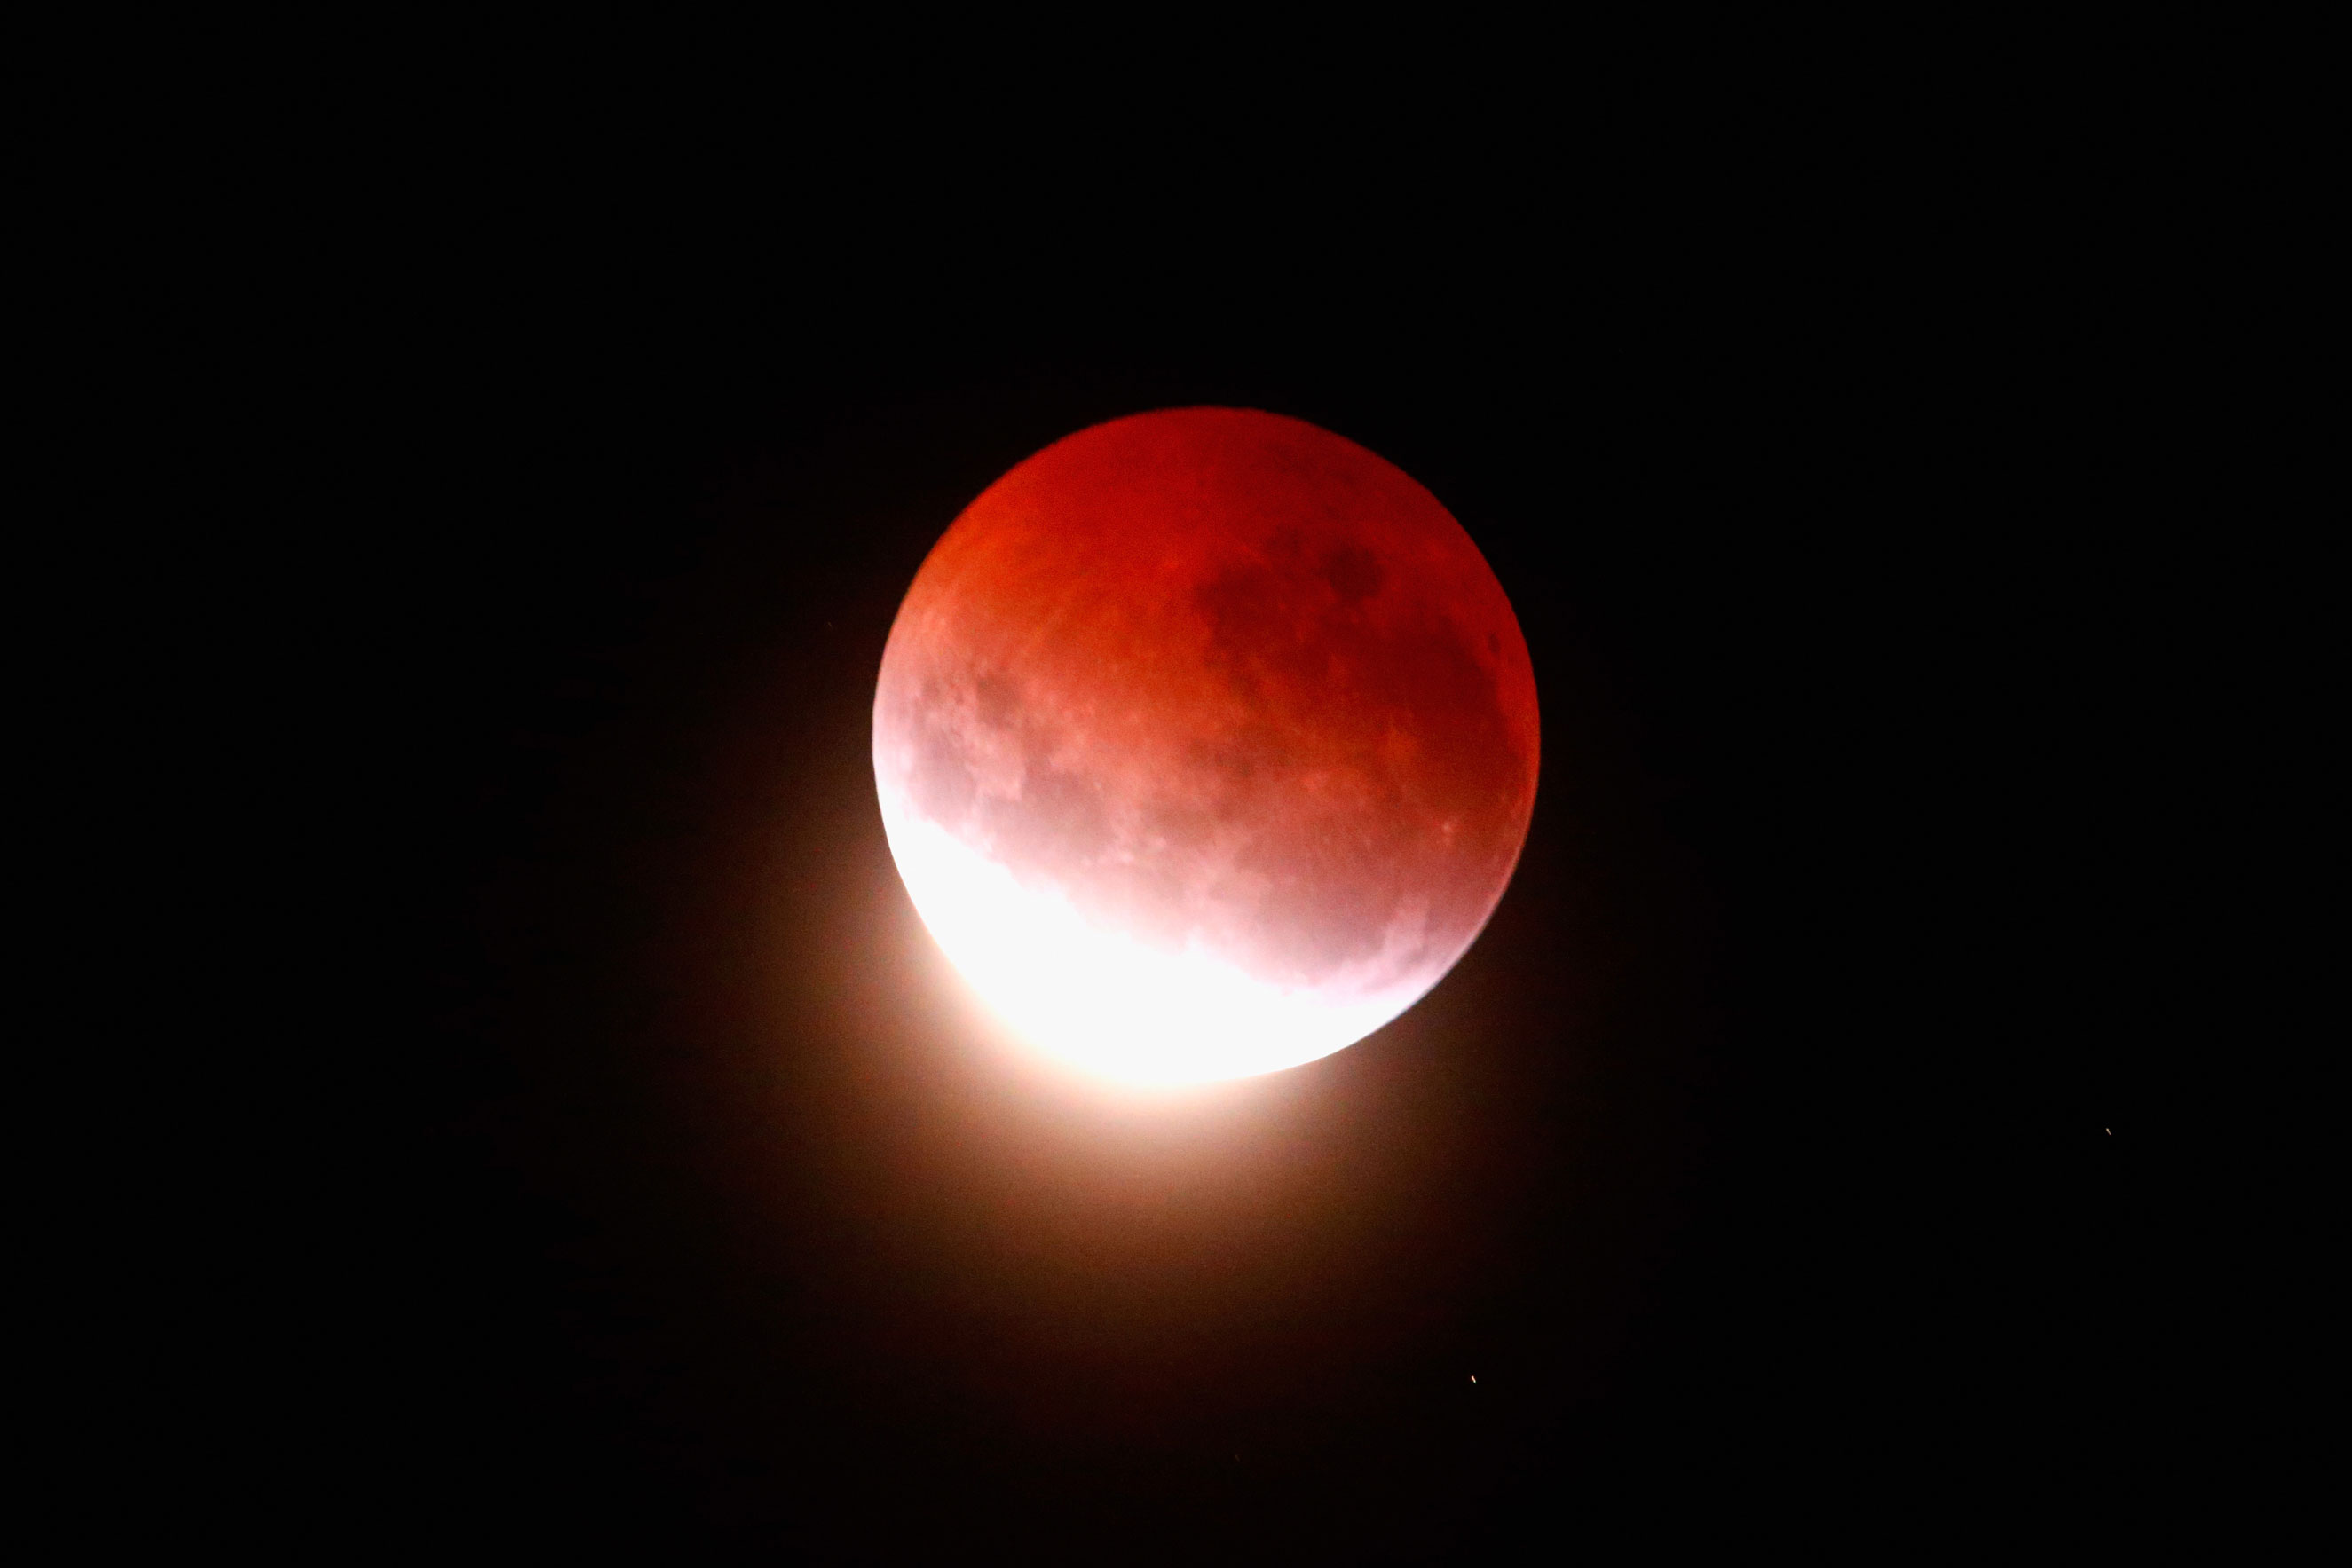 The blood moon lights up the sky during a total lunar eclipse on April 4, 2015 in Auckland.